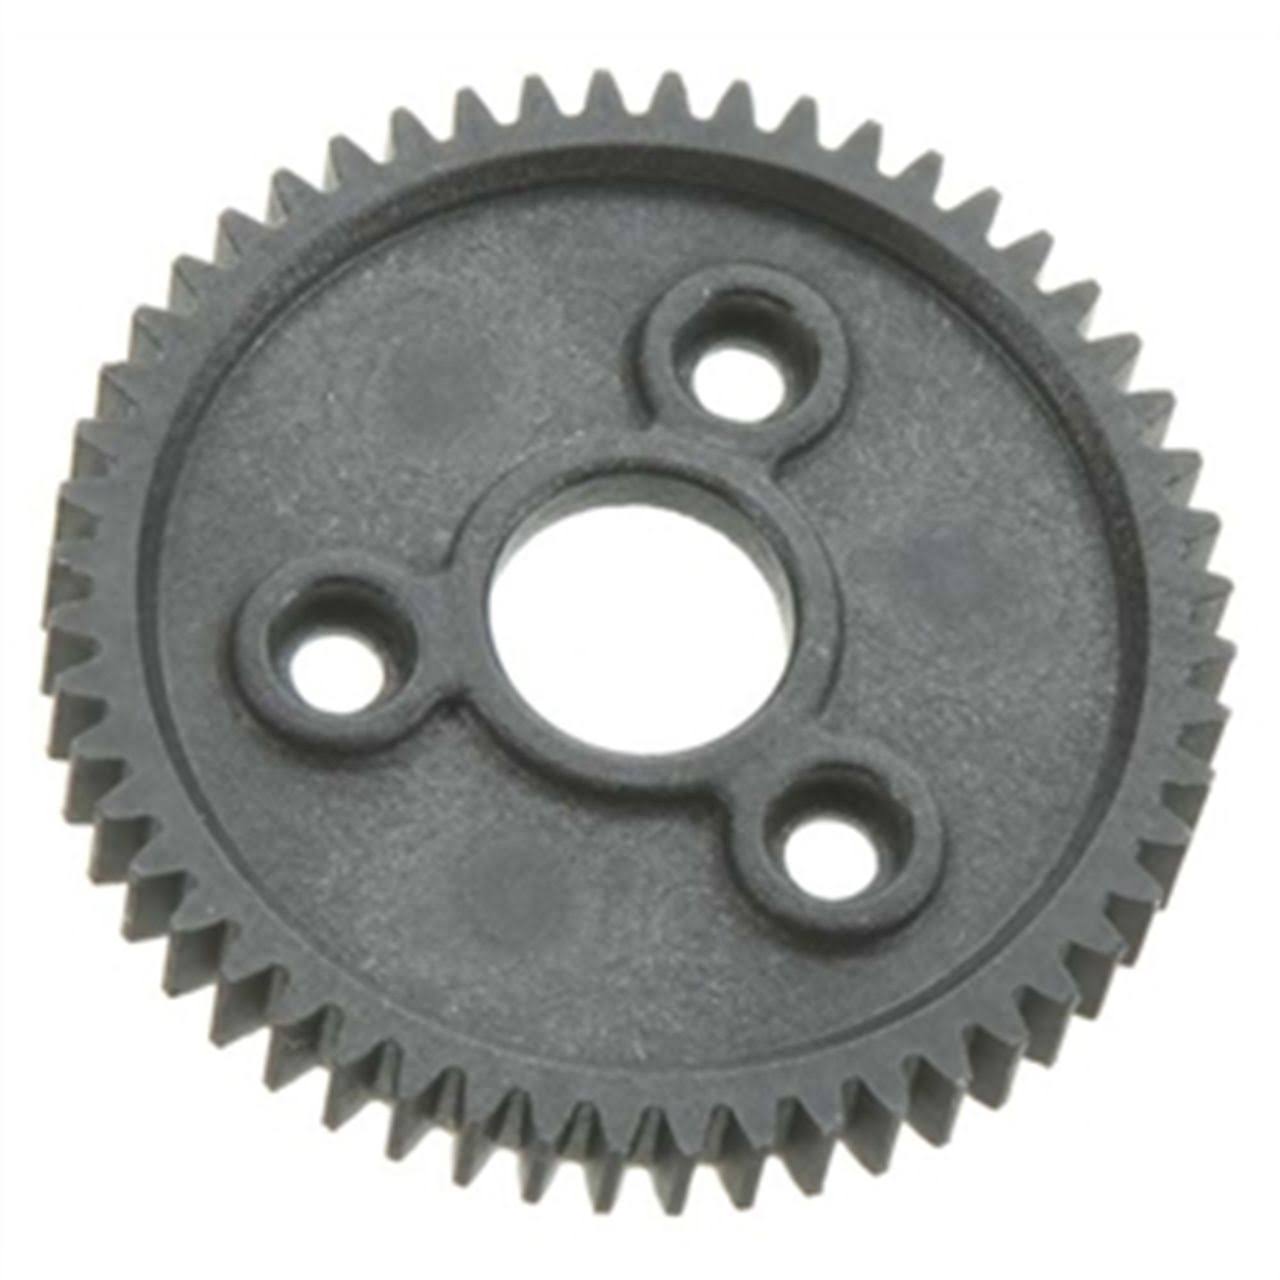 Traxxas Metric Pitch Spur Gear Compatible with 32P 52T